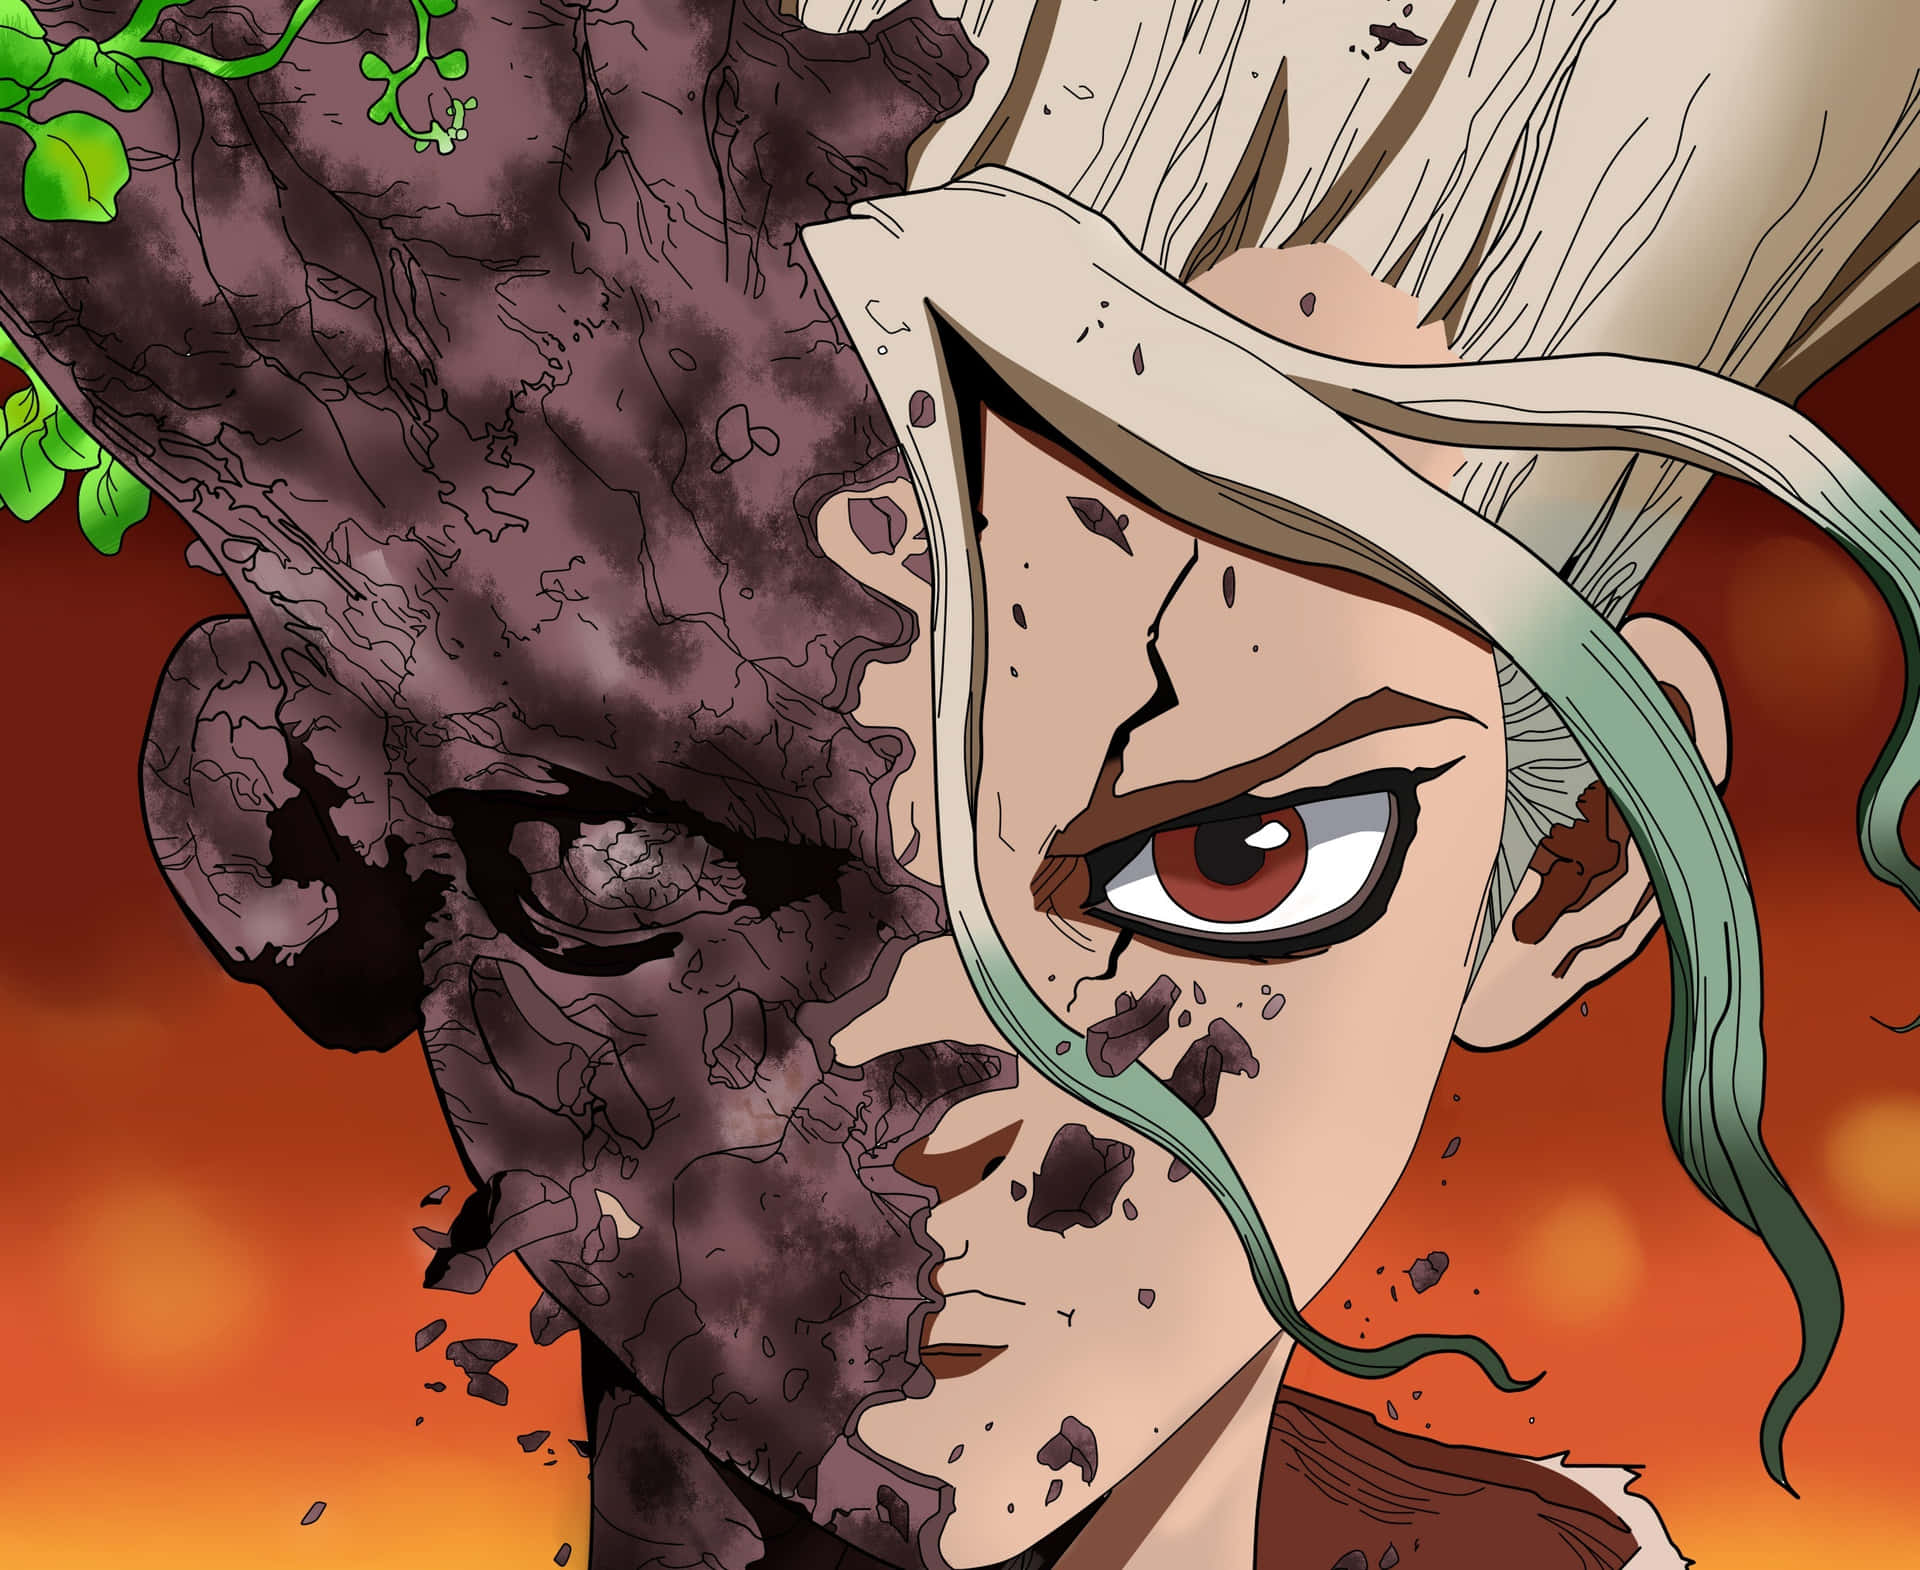 Enjoy an adventure with Dr Stone!